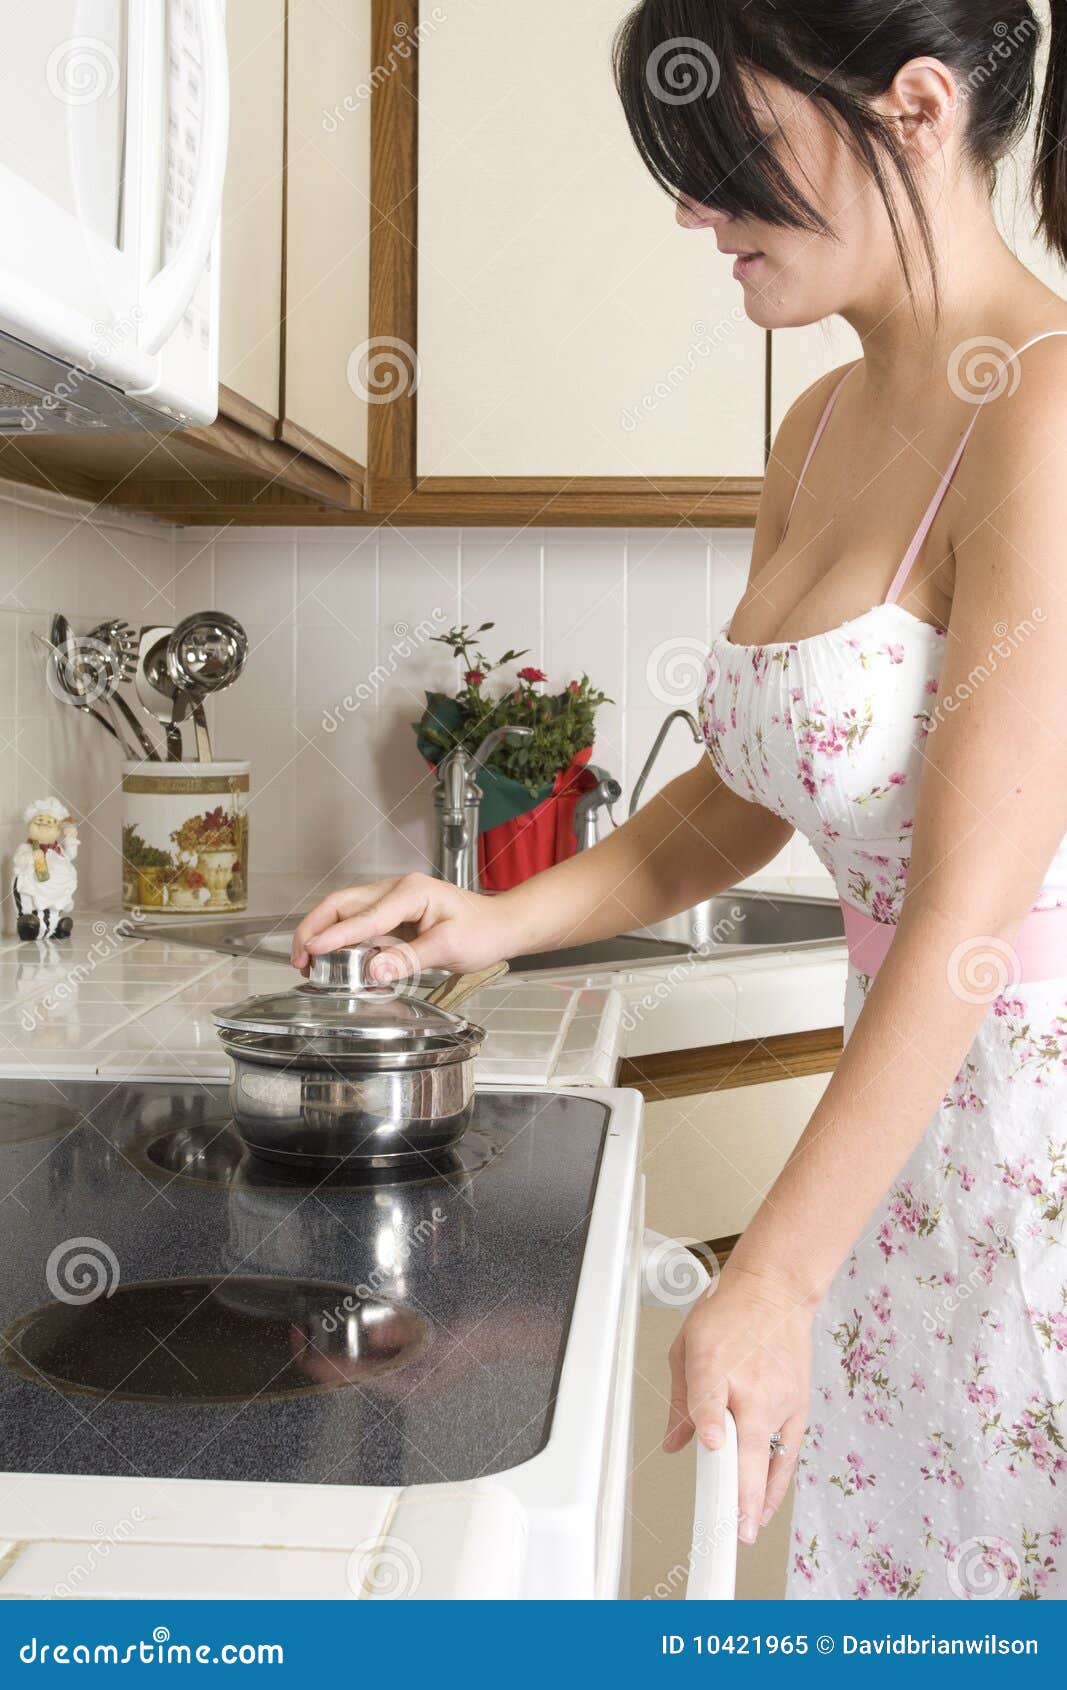 Housewife in the kitchen stock image. Image of hair, dress ...